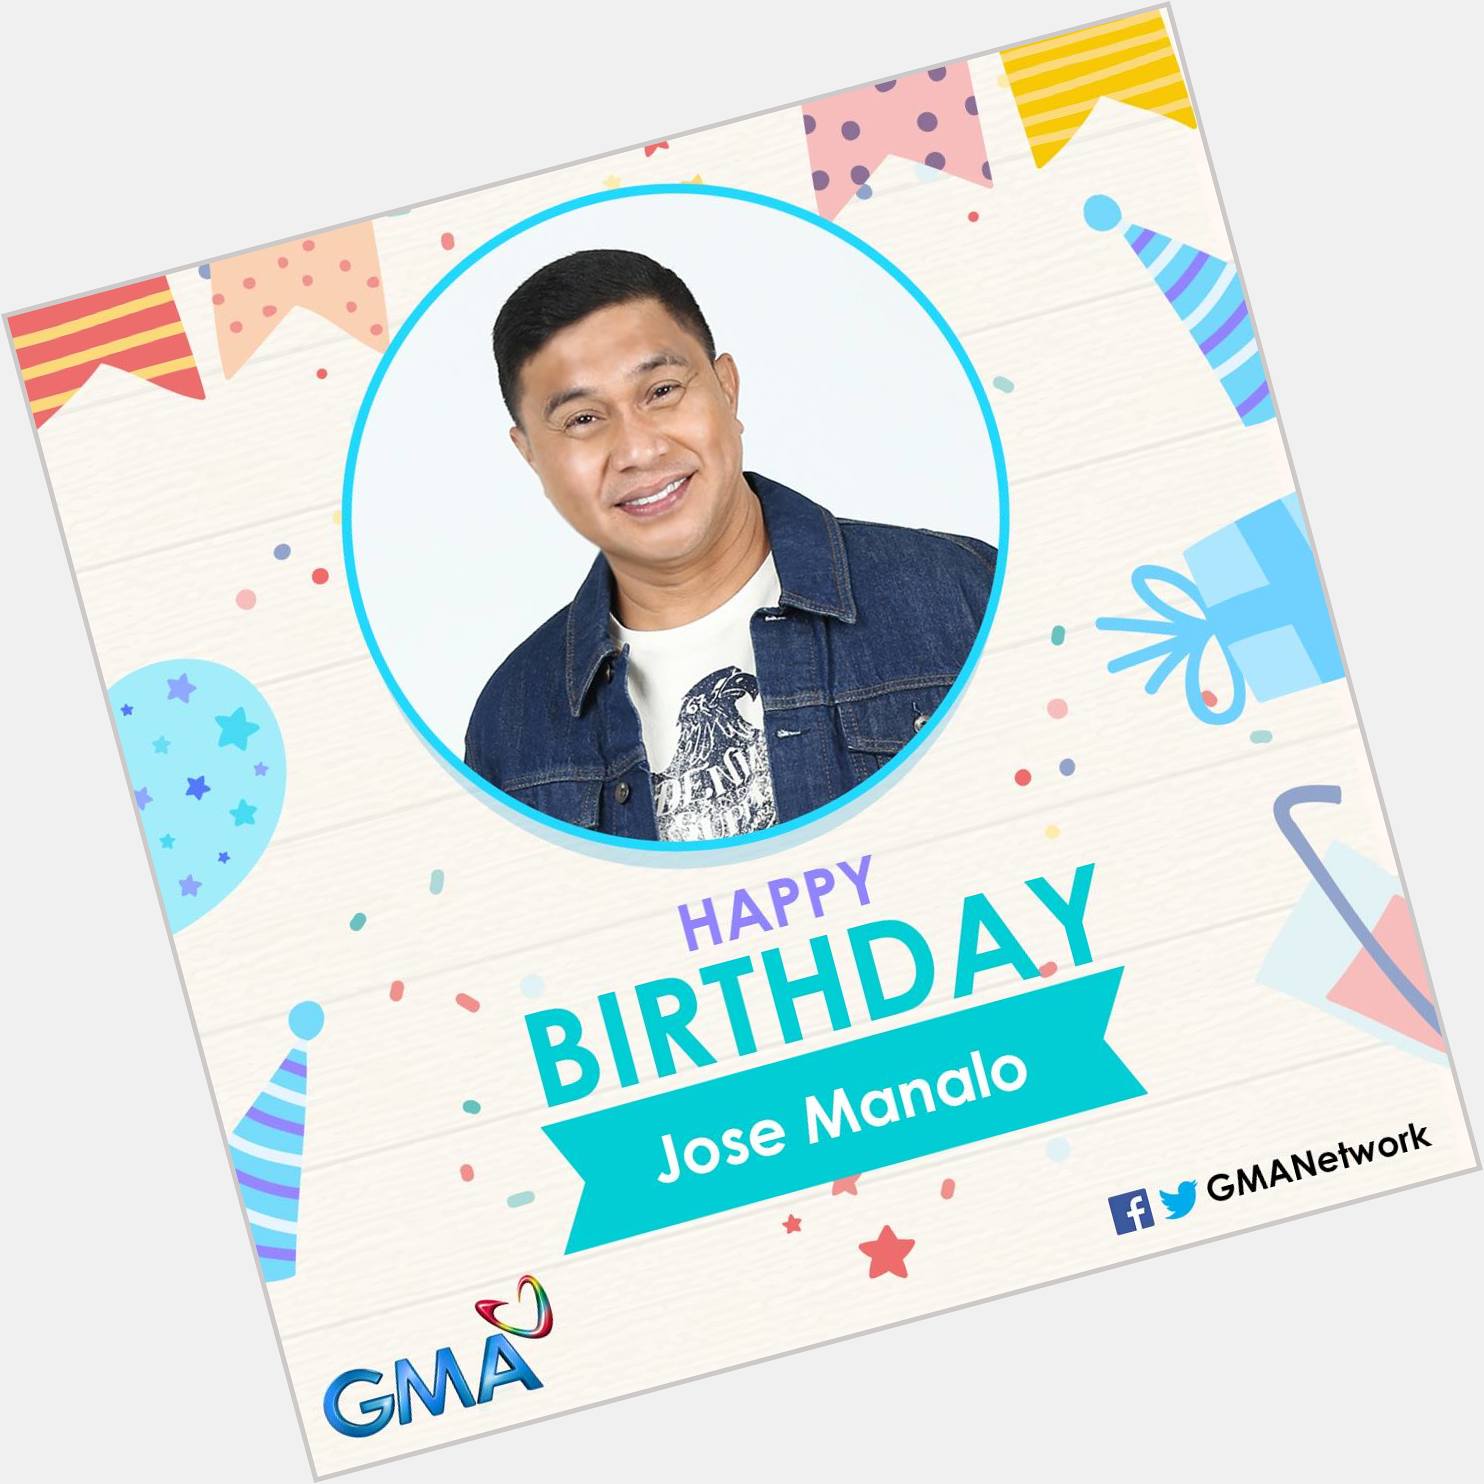 Happy birthday to talented comedian-host, Jose Manalo! May you have more healthy and happy years ahead! 